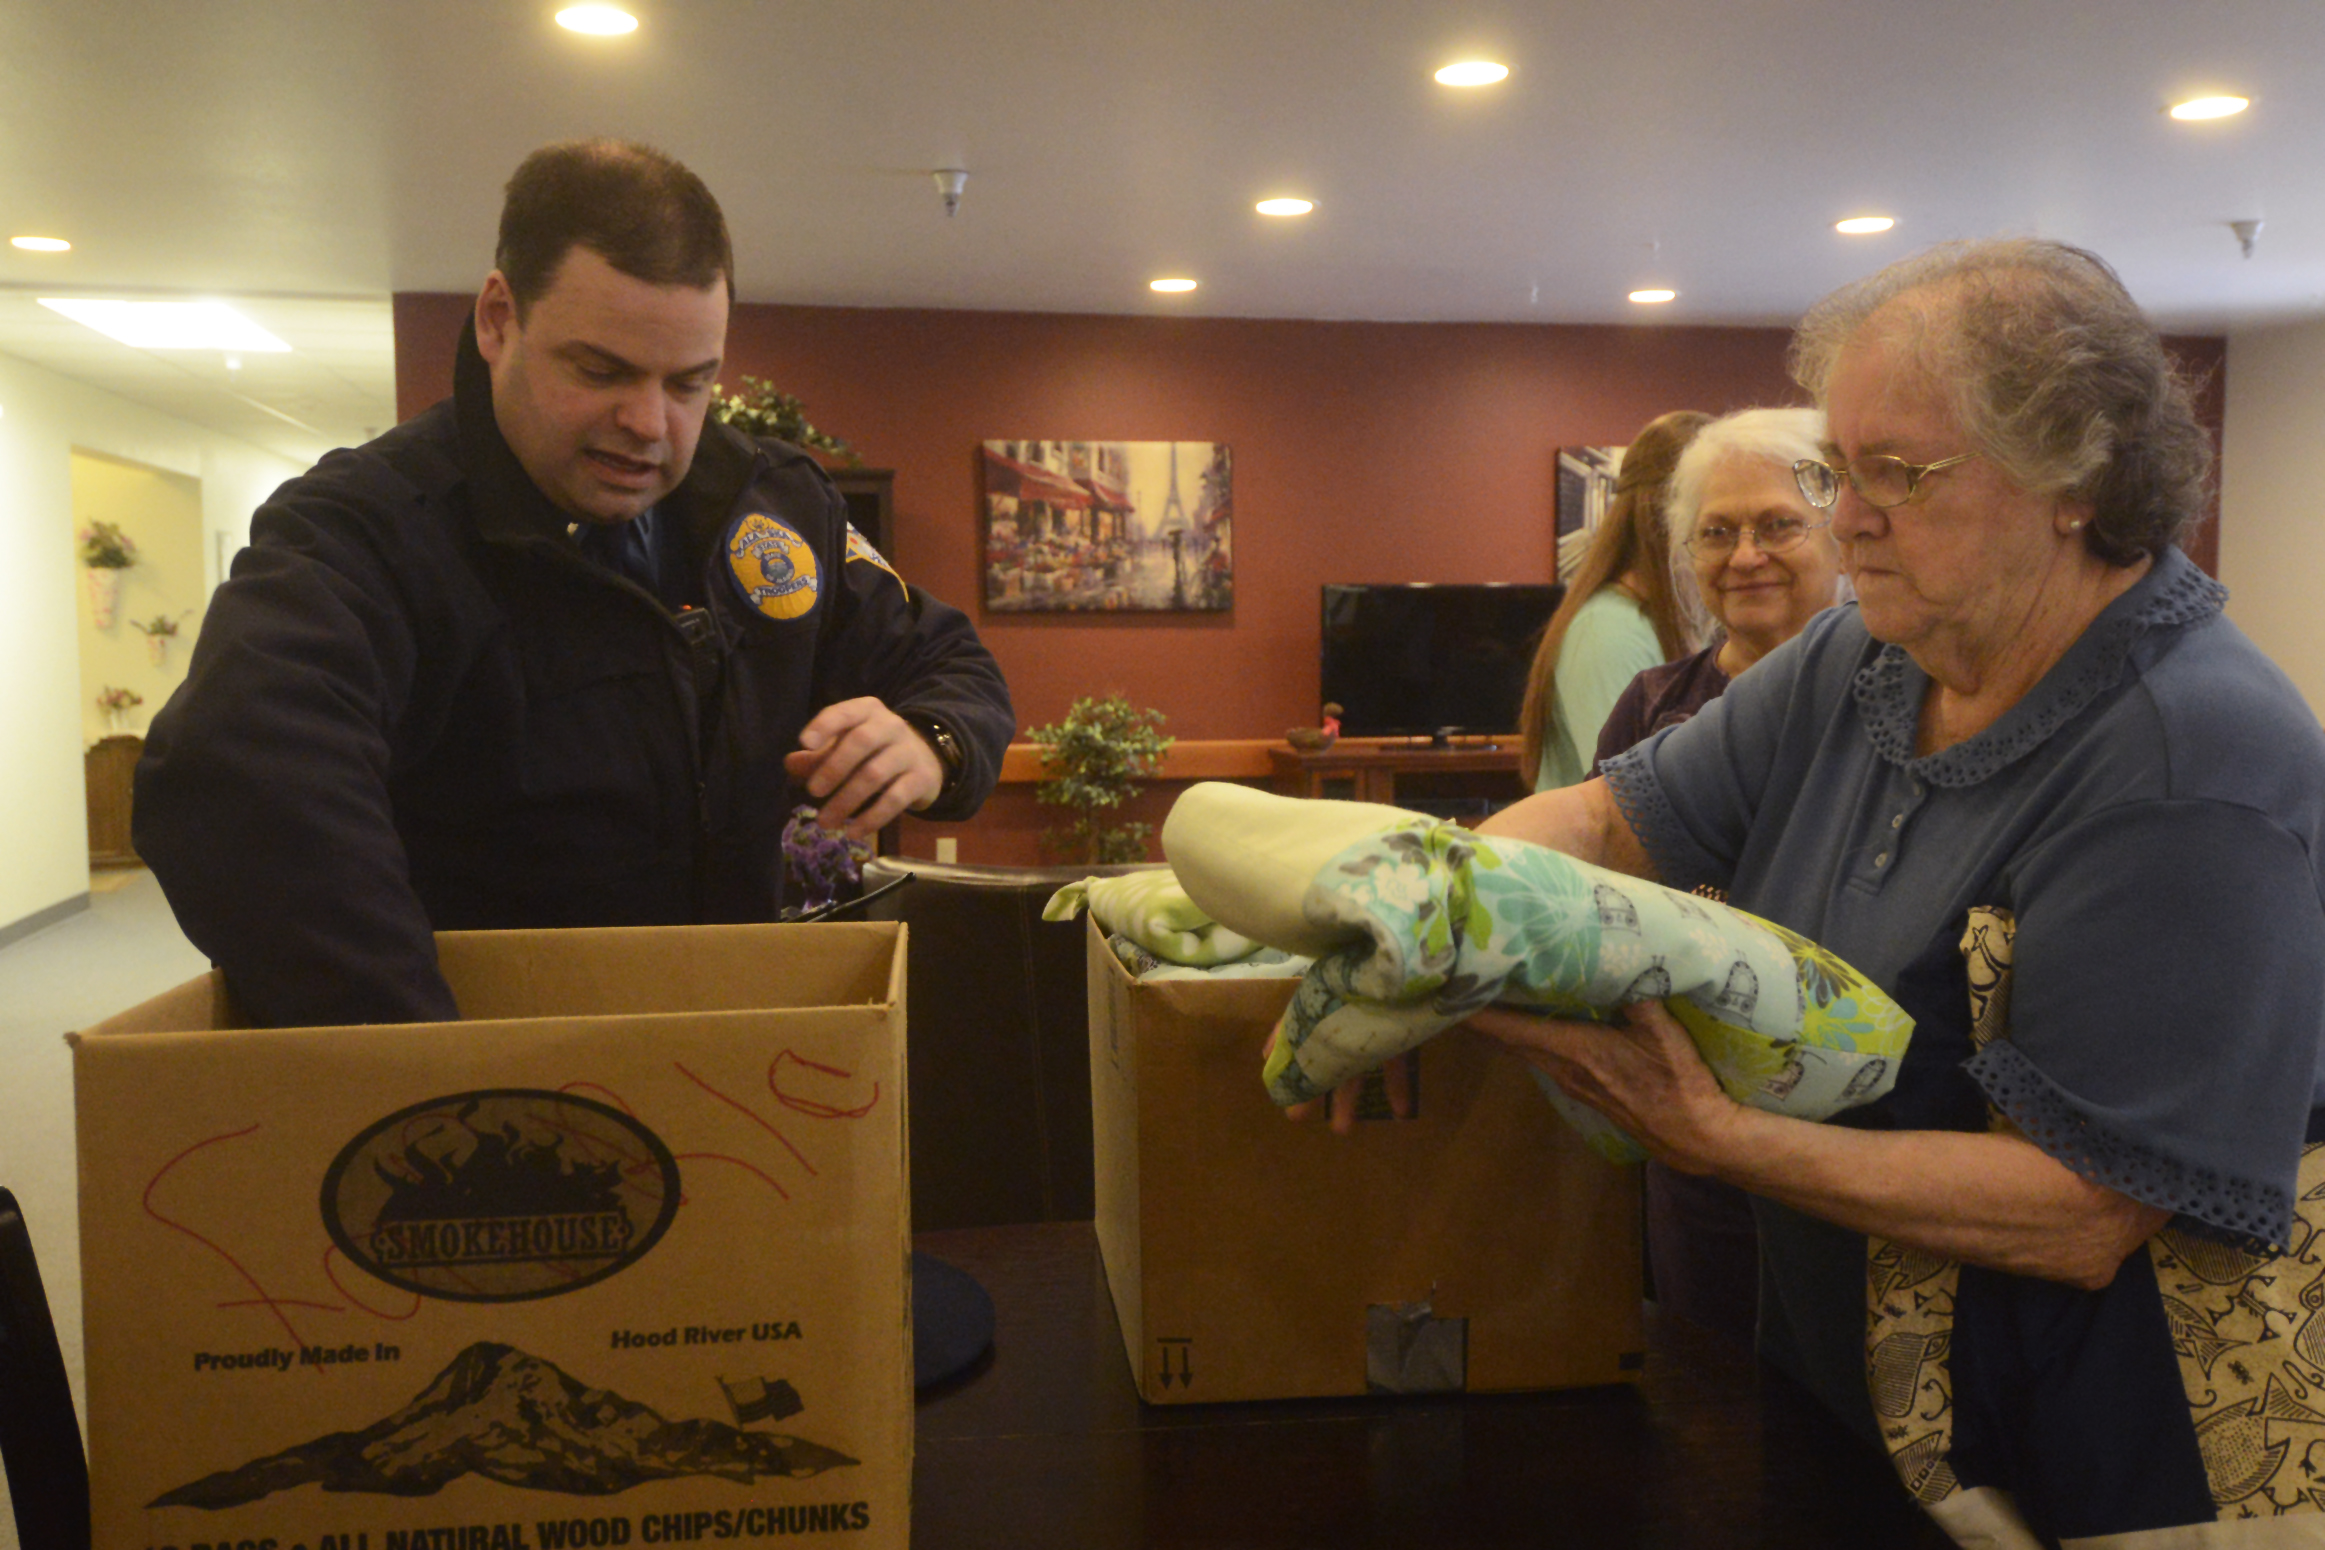 Lt. Dane Gilmore of the Alaska State Troopers accepts 26 hand-made quilts from a group of crafters on Thursday, March 11, 2016 at Northwood Apartments in Soldotna, Alaska. Through several cooperating agencies, the blankets are given out to children in need or involved in investigations.